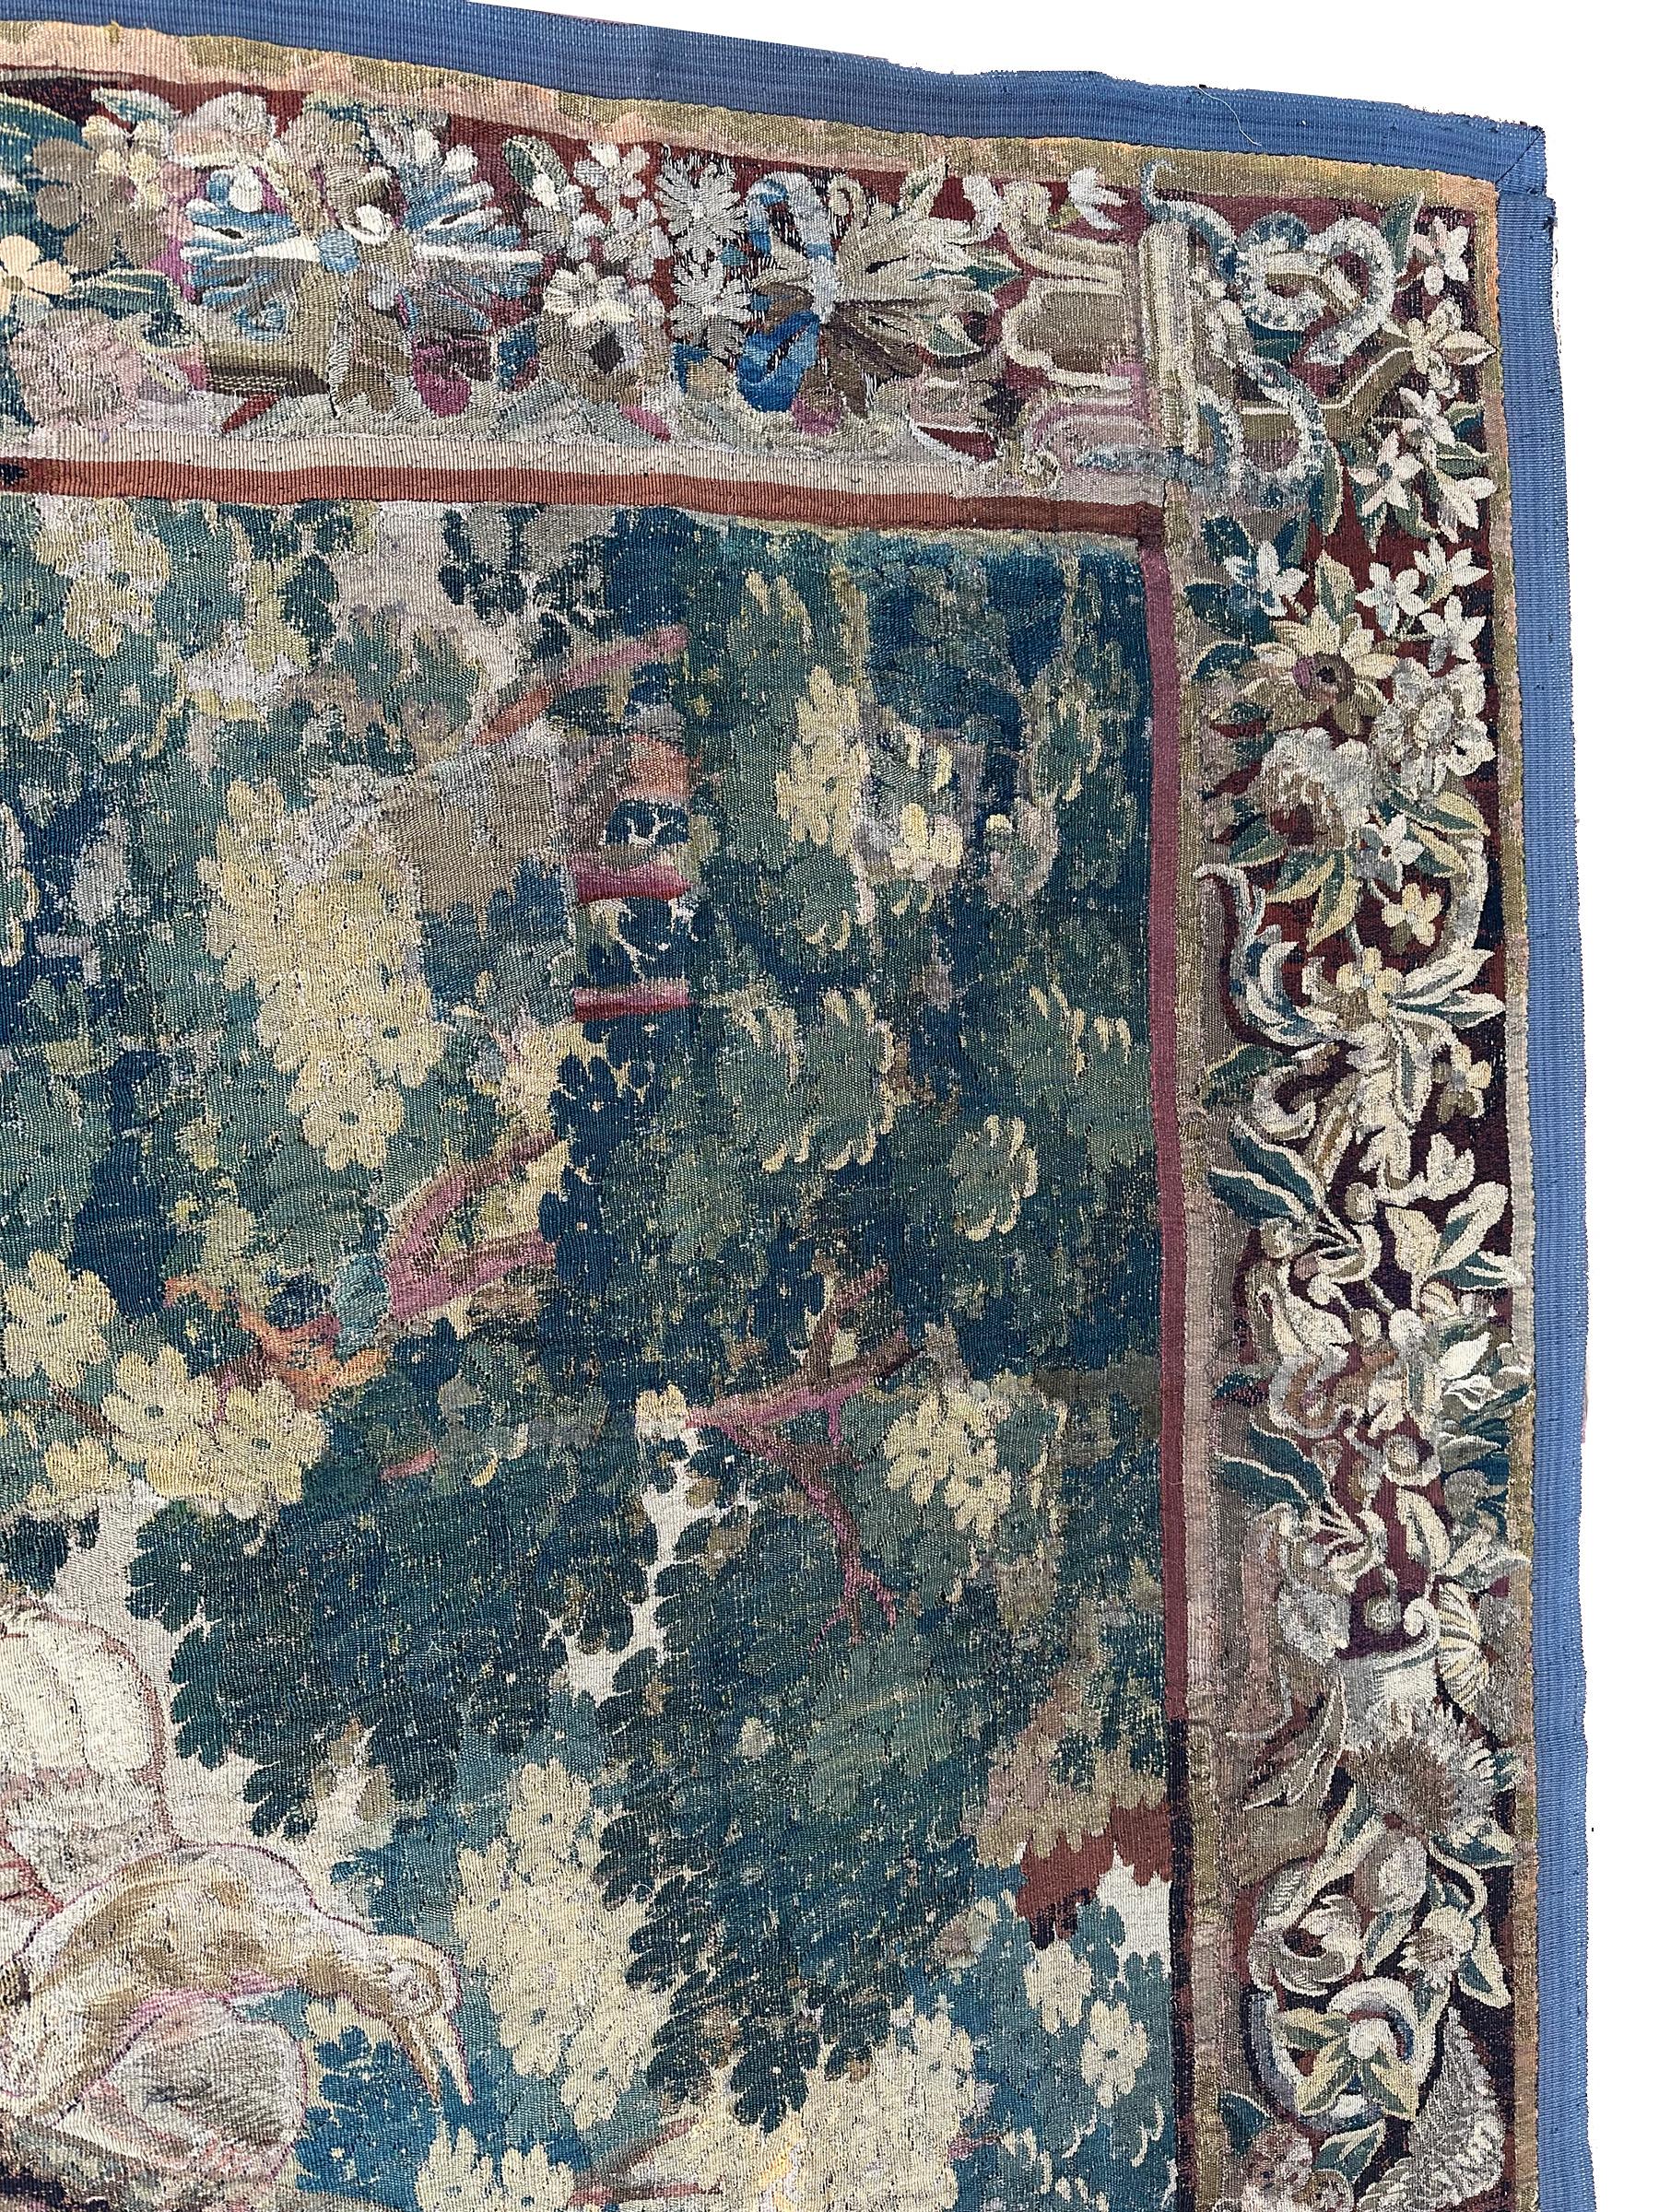 Early 18th century Flemish antique tapestry 10x13 Verdure Wool & Silk 297x384cm For Sale 8